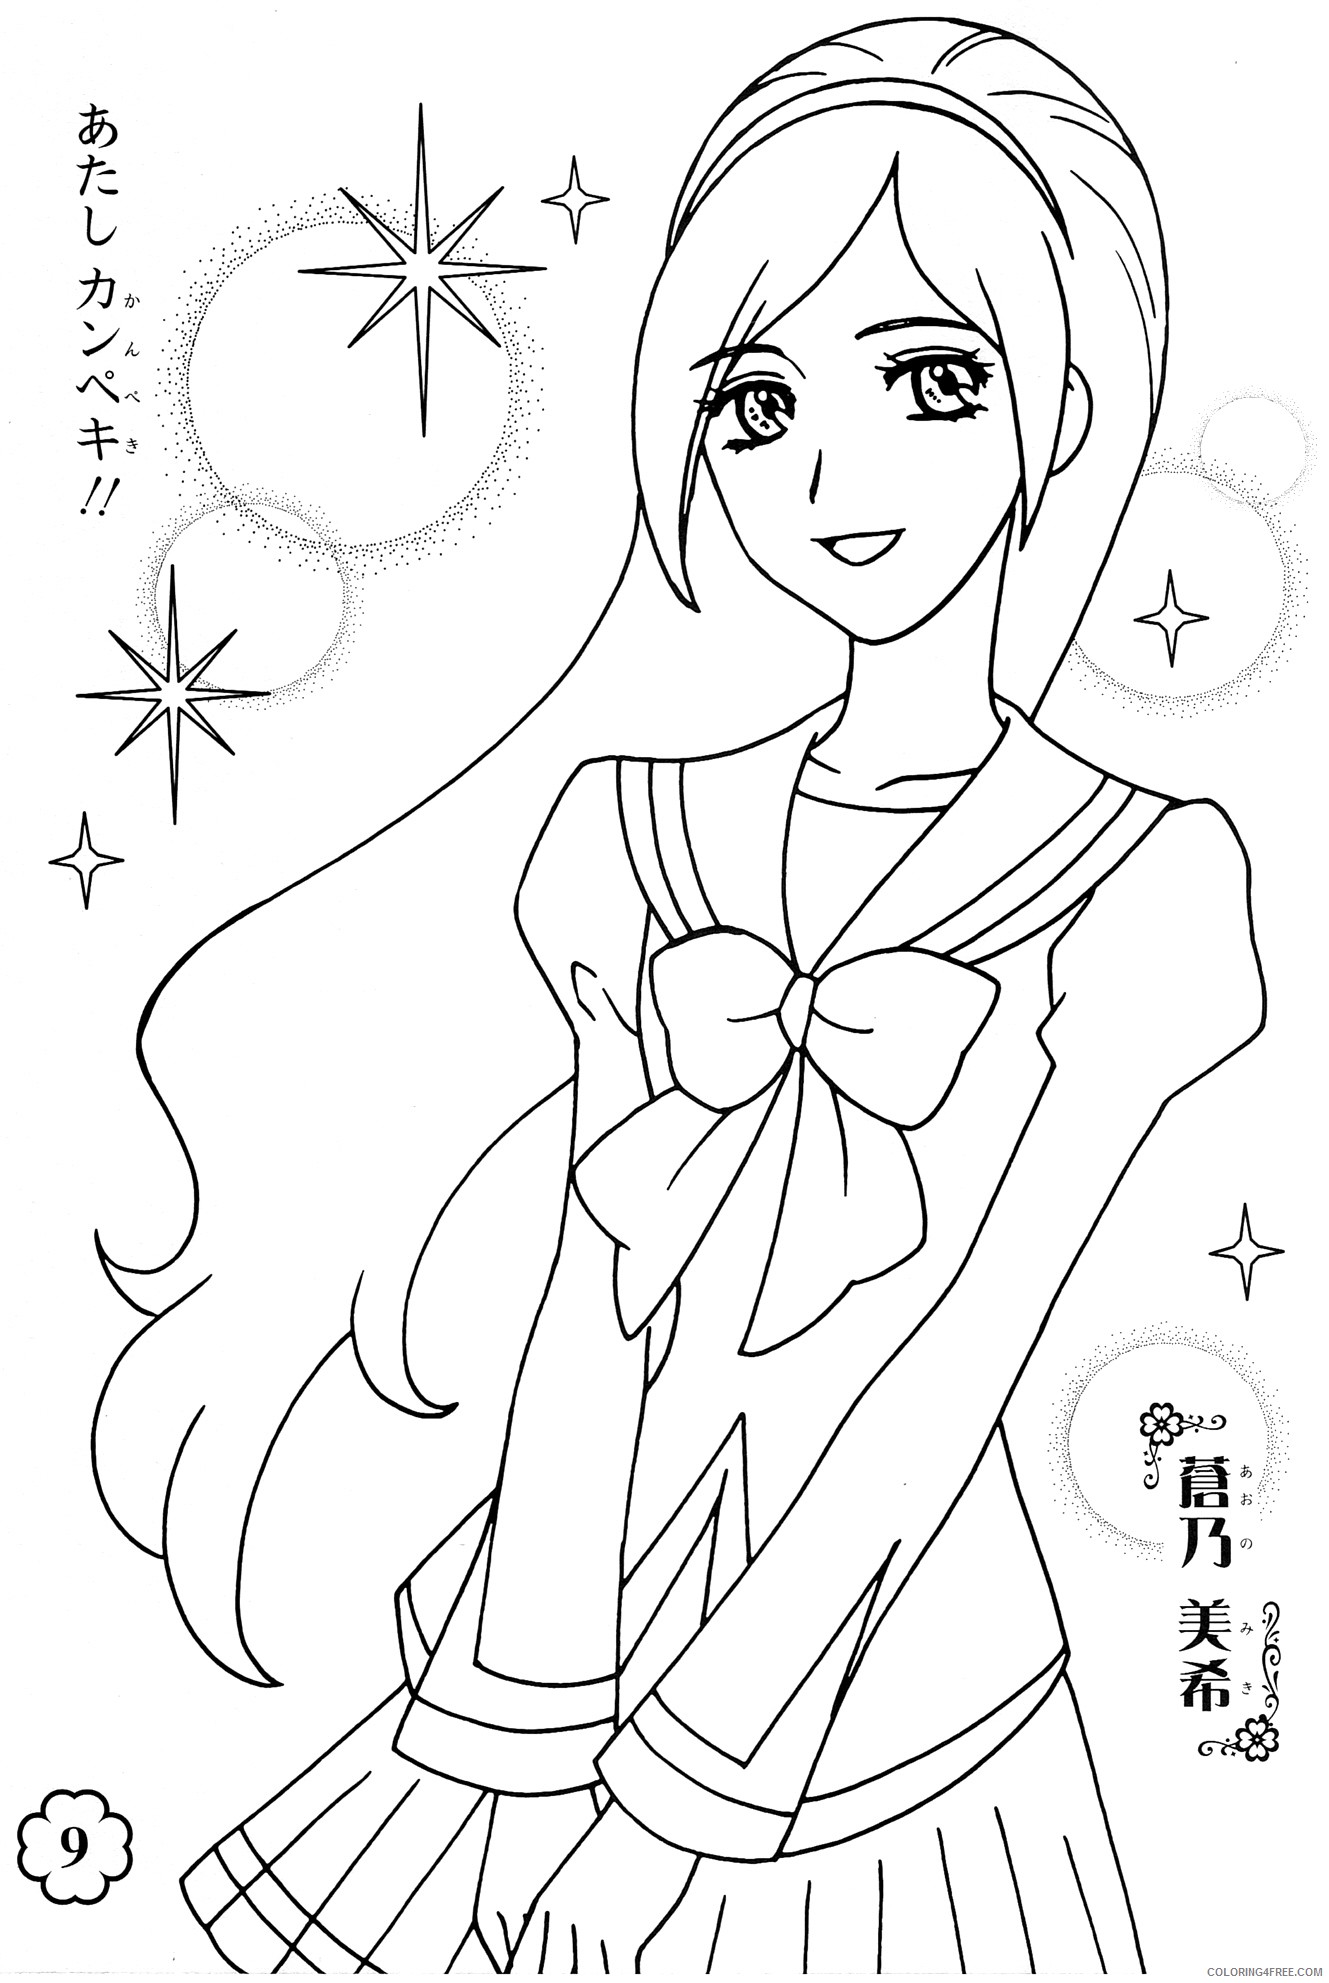 pretty anime girl coloring pages Coloring4free